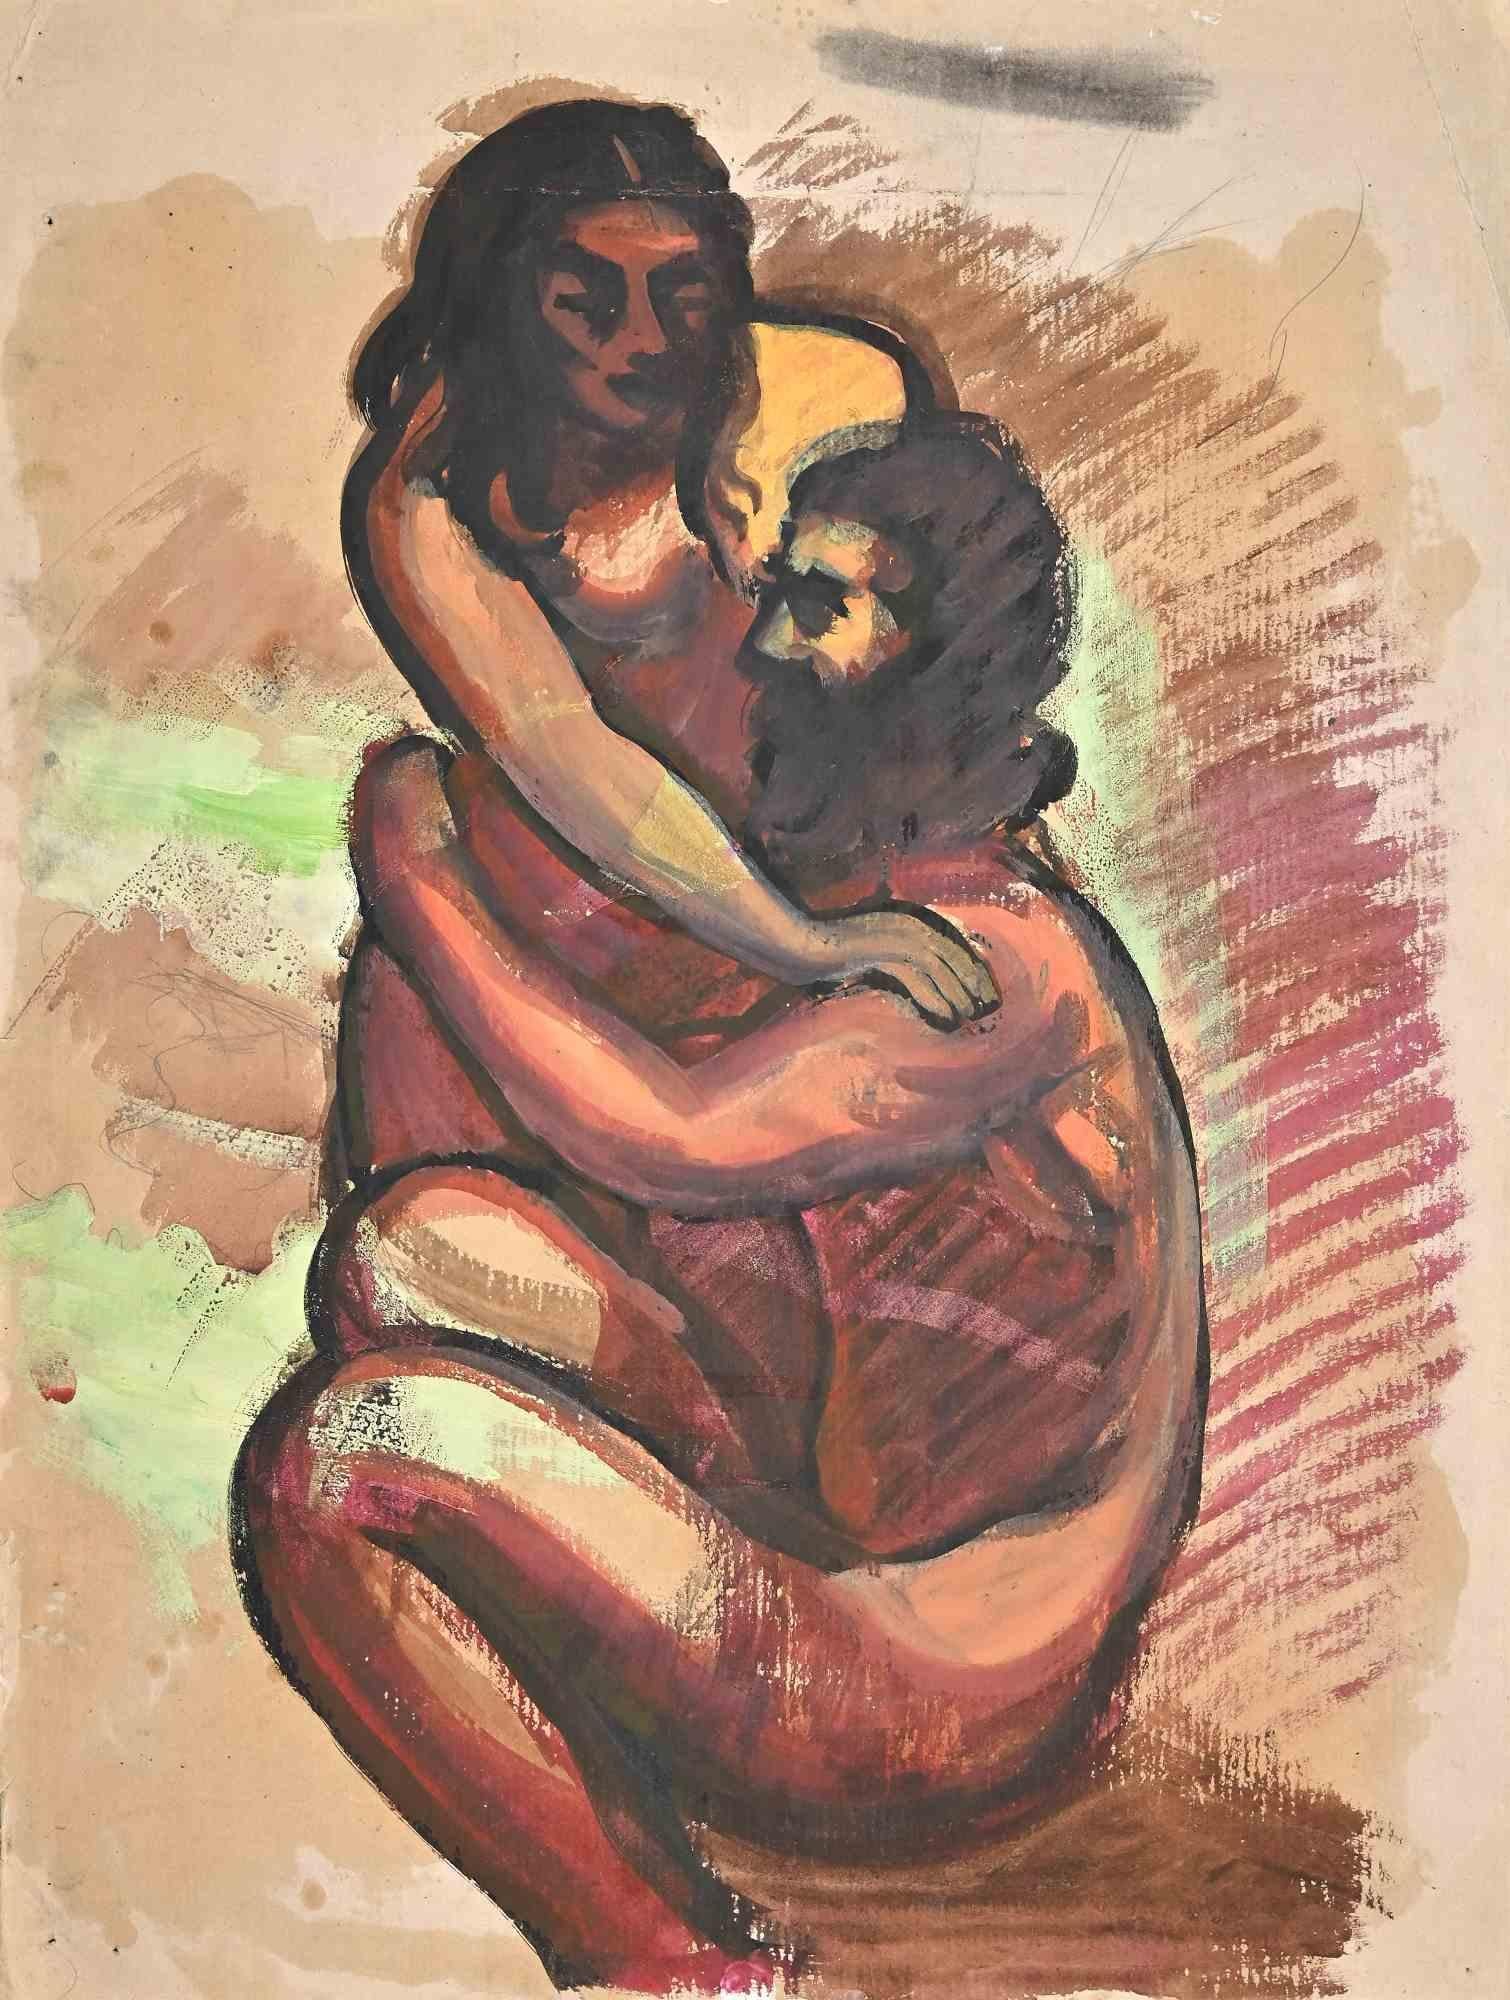 Love is a drawing in watercolor and pastel realized in the Mid-20th Century by Jean Delpech (1916-1988). 

Good conditions with minor folding.

The artwork is realized in harmonious and congruent colors through mastery.

Jean-Raymond Delpech